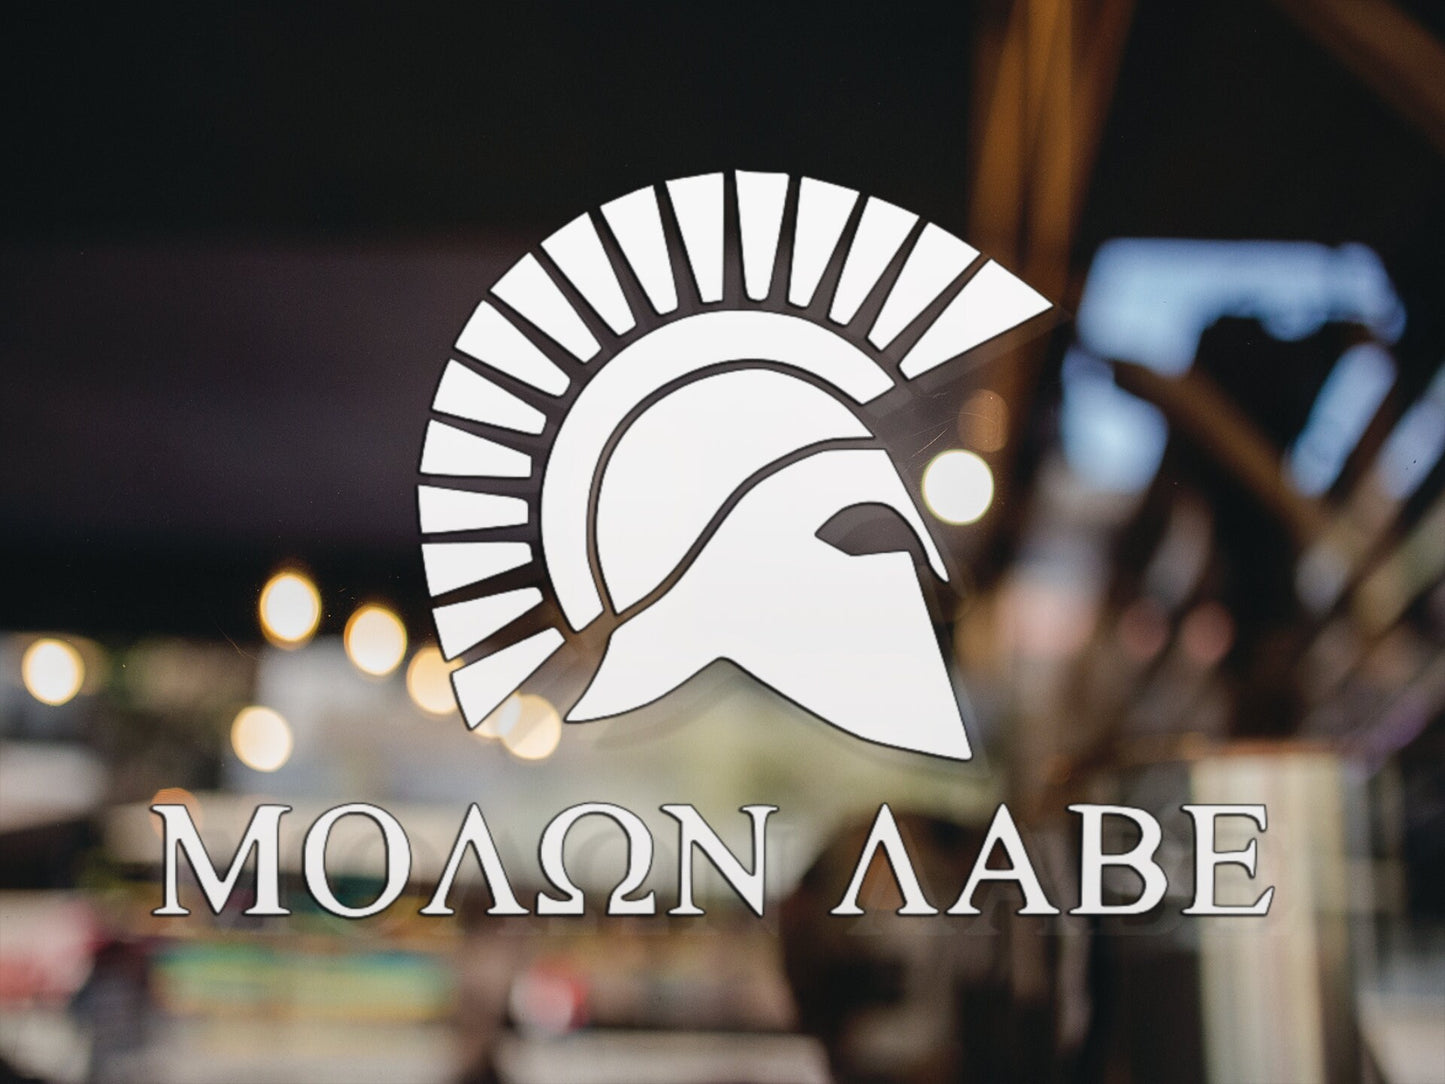 Spartan Head Molon Labe Decal - Many Colors & Sizes